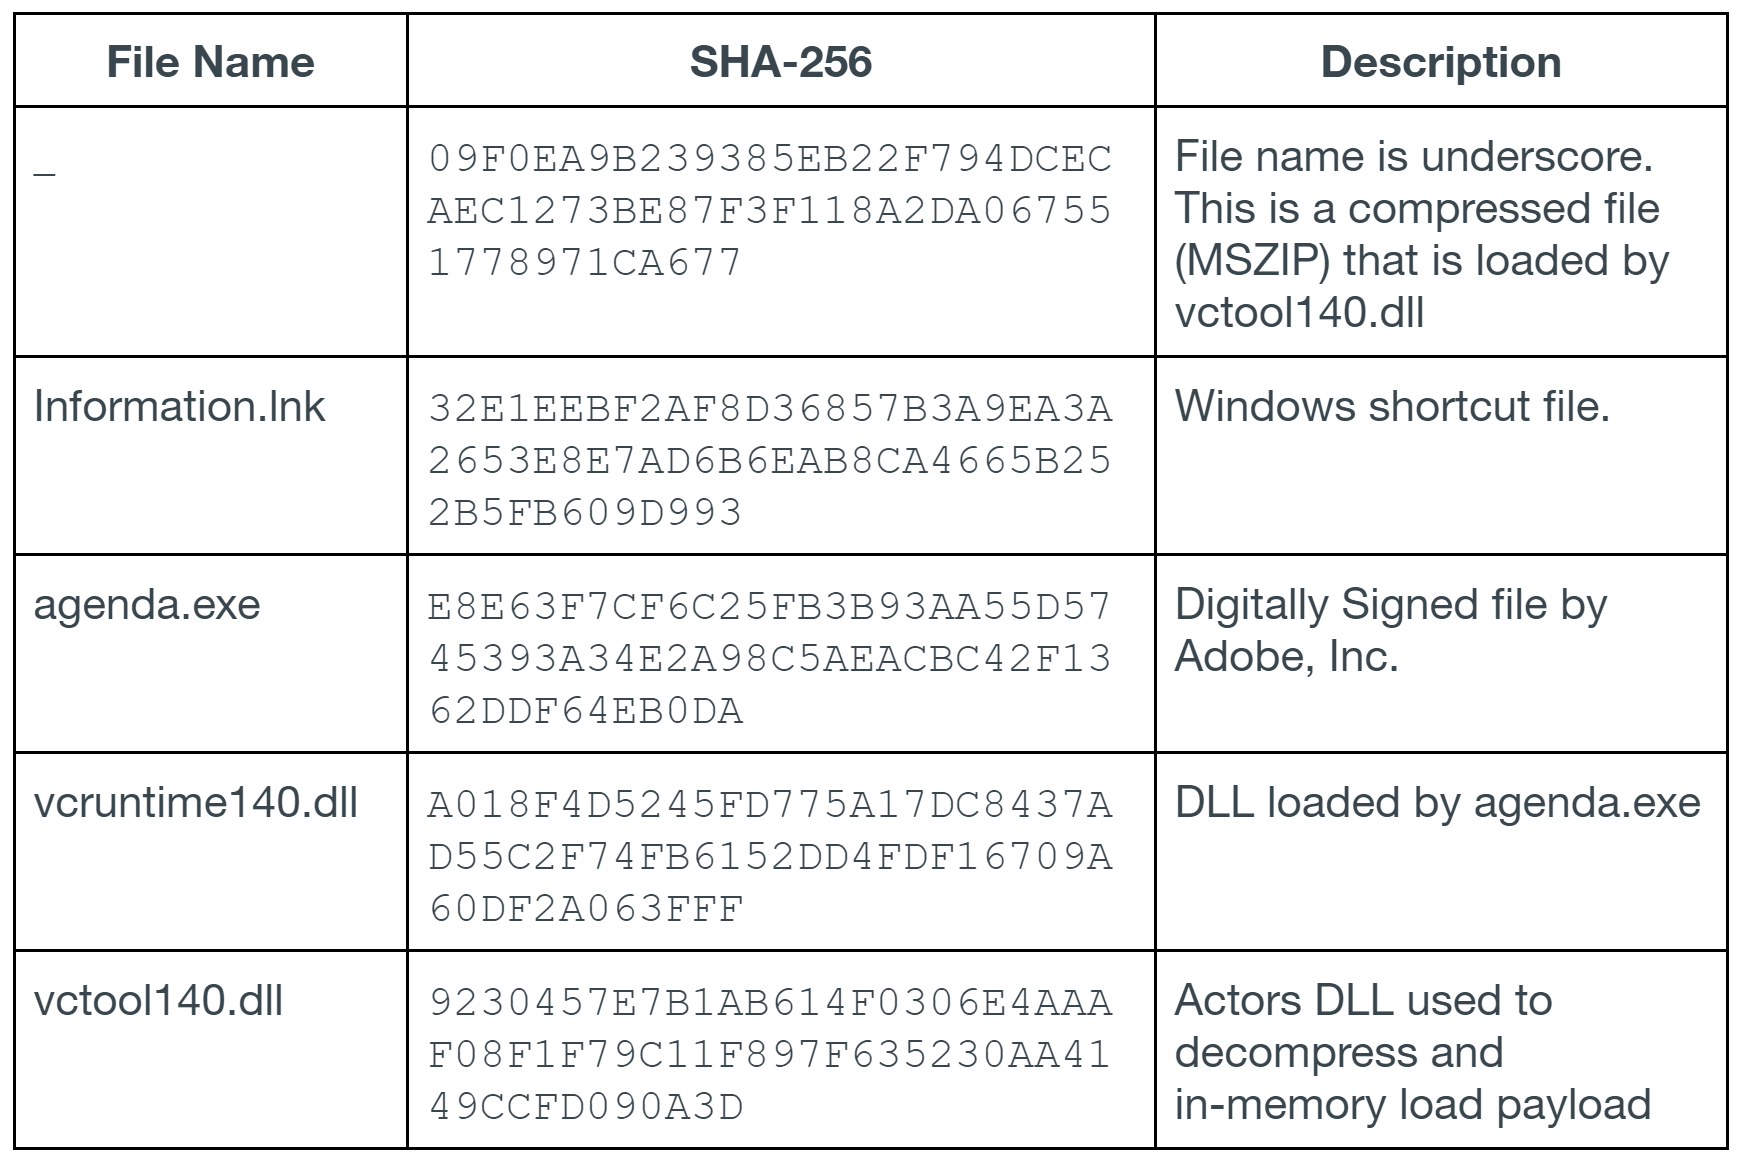 Agenda.iso embedded file properties – Campaign 2. The table shows file name, SHA-256 and description. File name underscore is a compressed file loaded by vctool140.dll. Information.lnk is a Windows shortcut file. agenda.exe is a file digitally signed by Adobe. vcruntime140.dll is a DLL loaded by agenda.exe. vctool140.dll is the actor's DLL, used to decompress and in-memory load payload. 